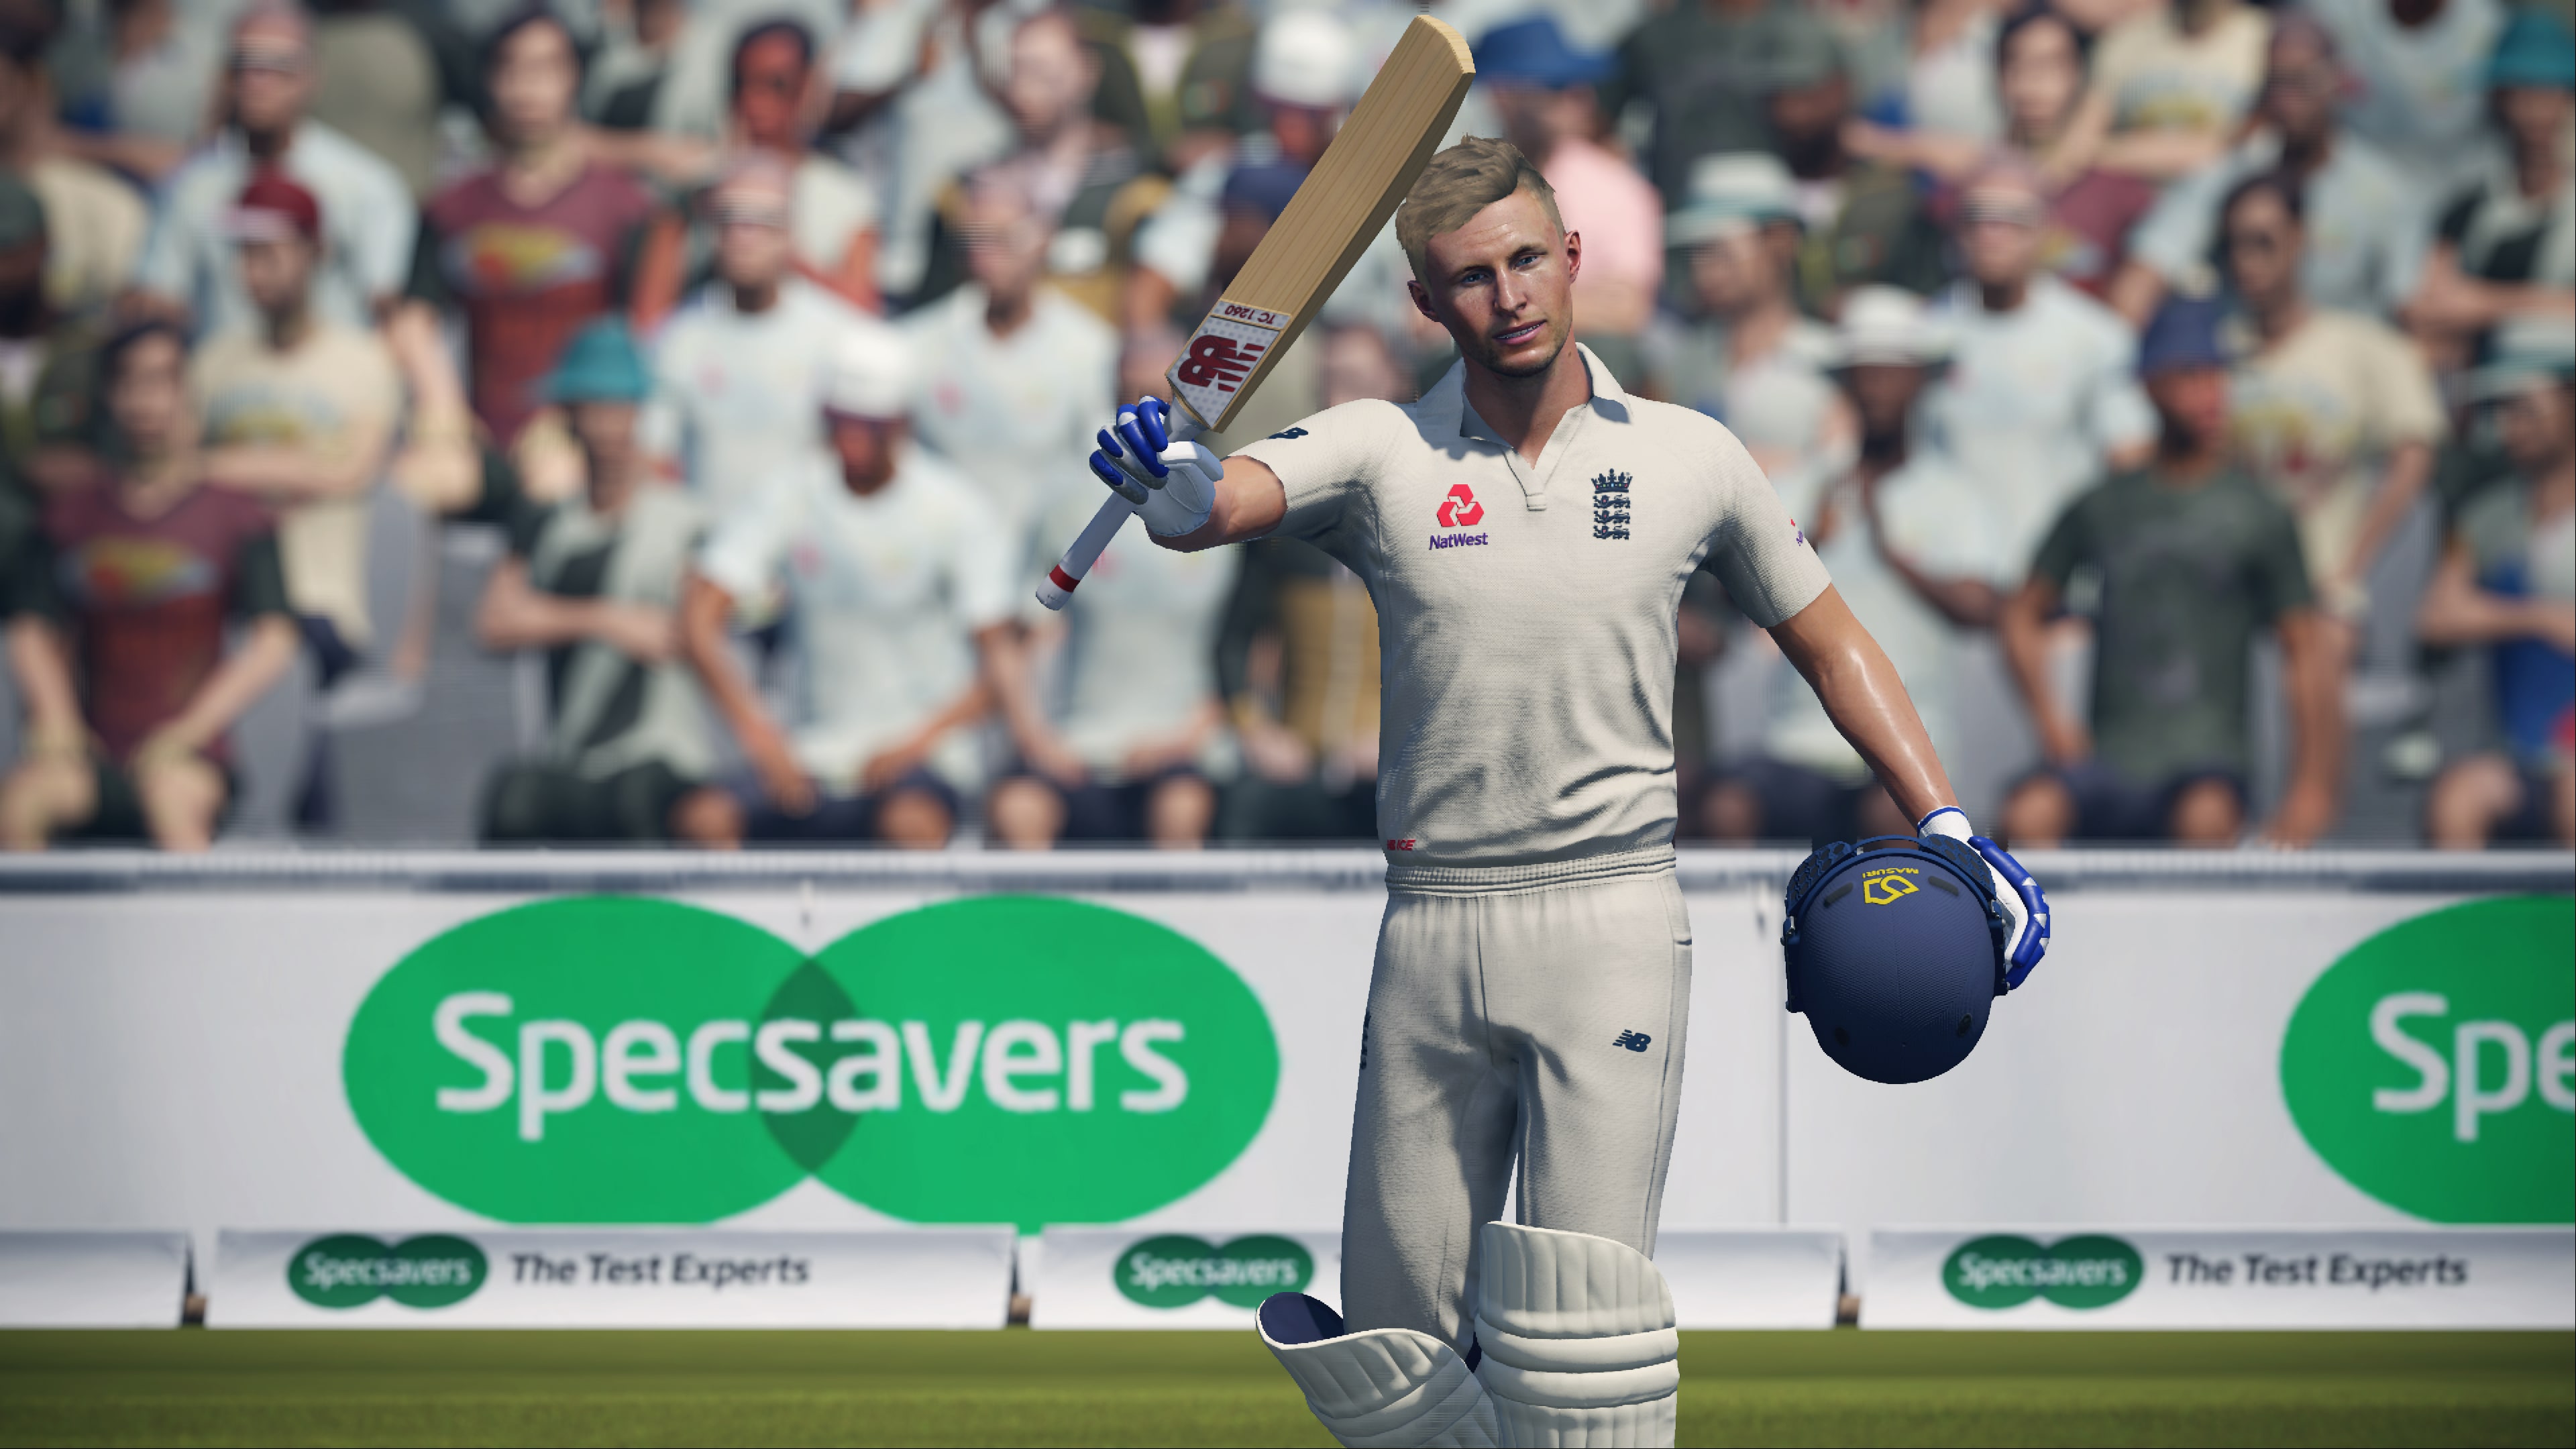 cricket vr game ps4